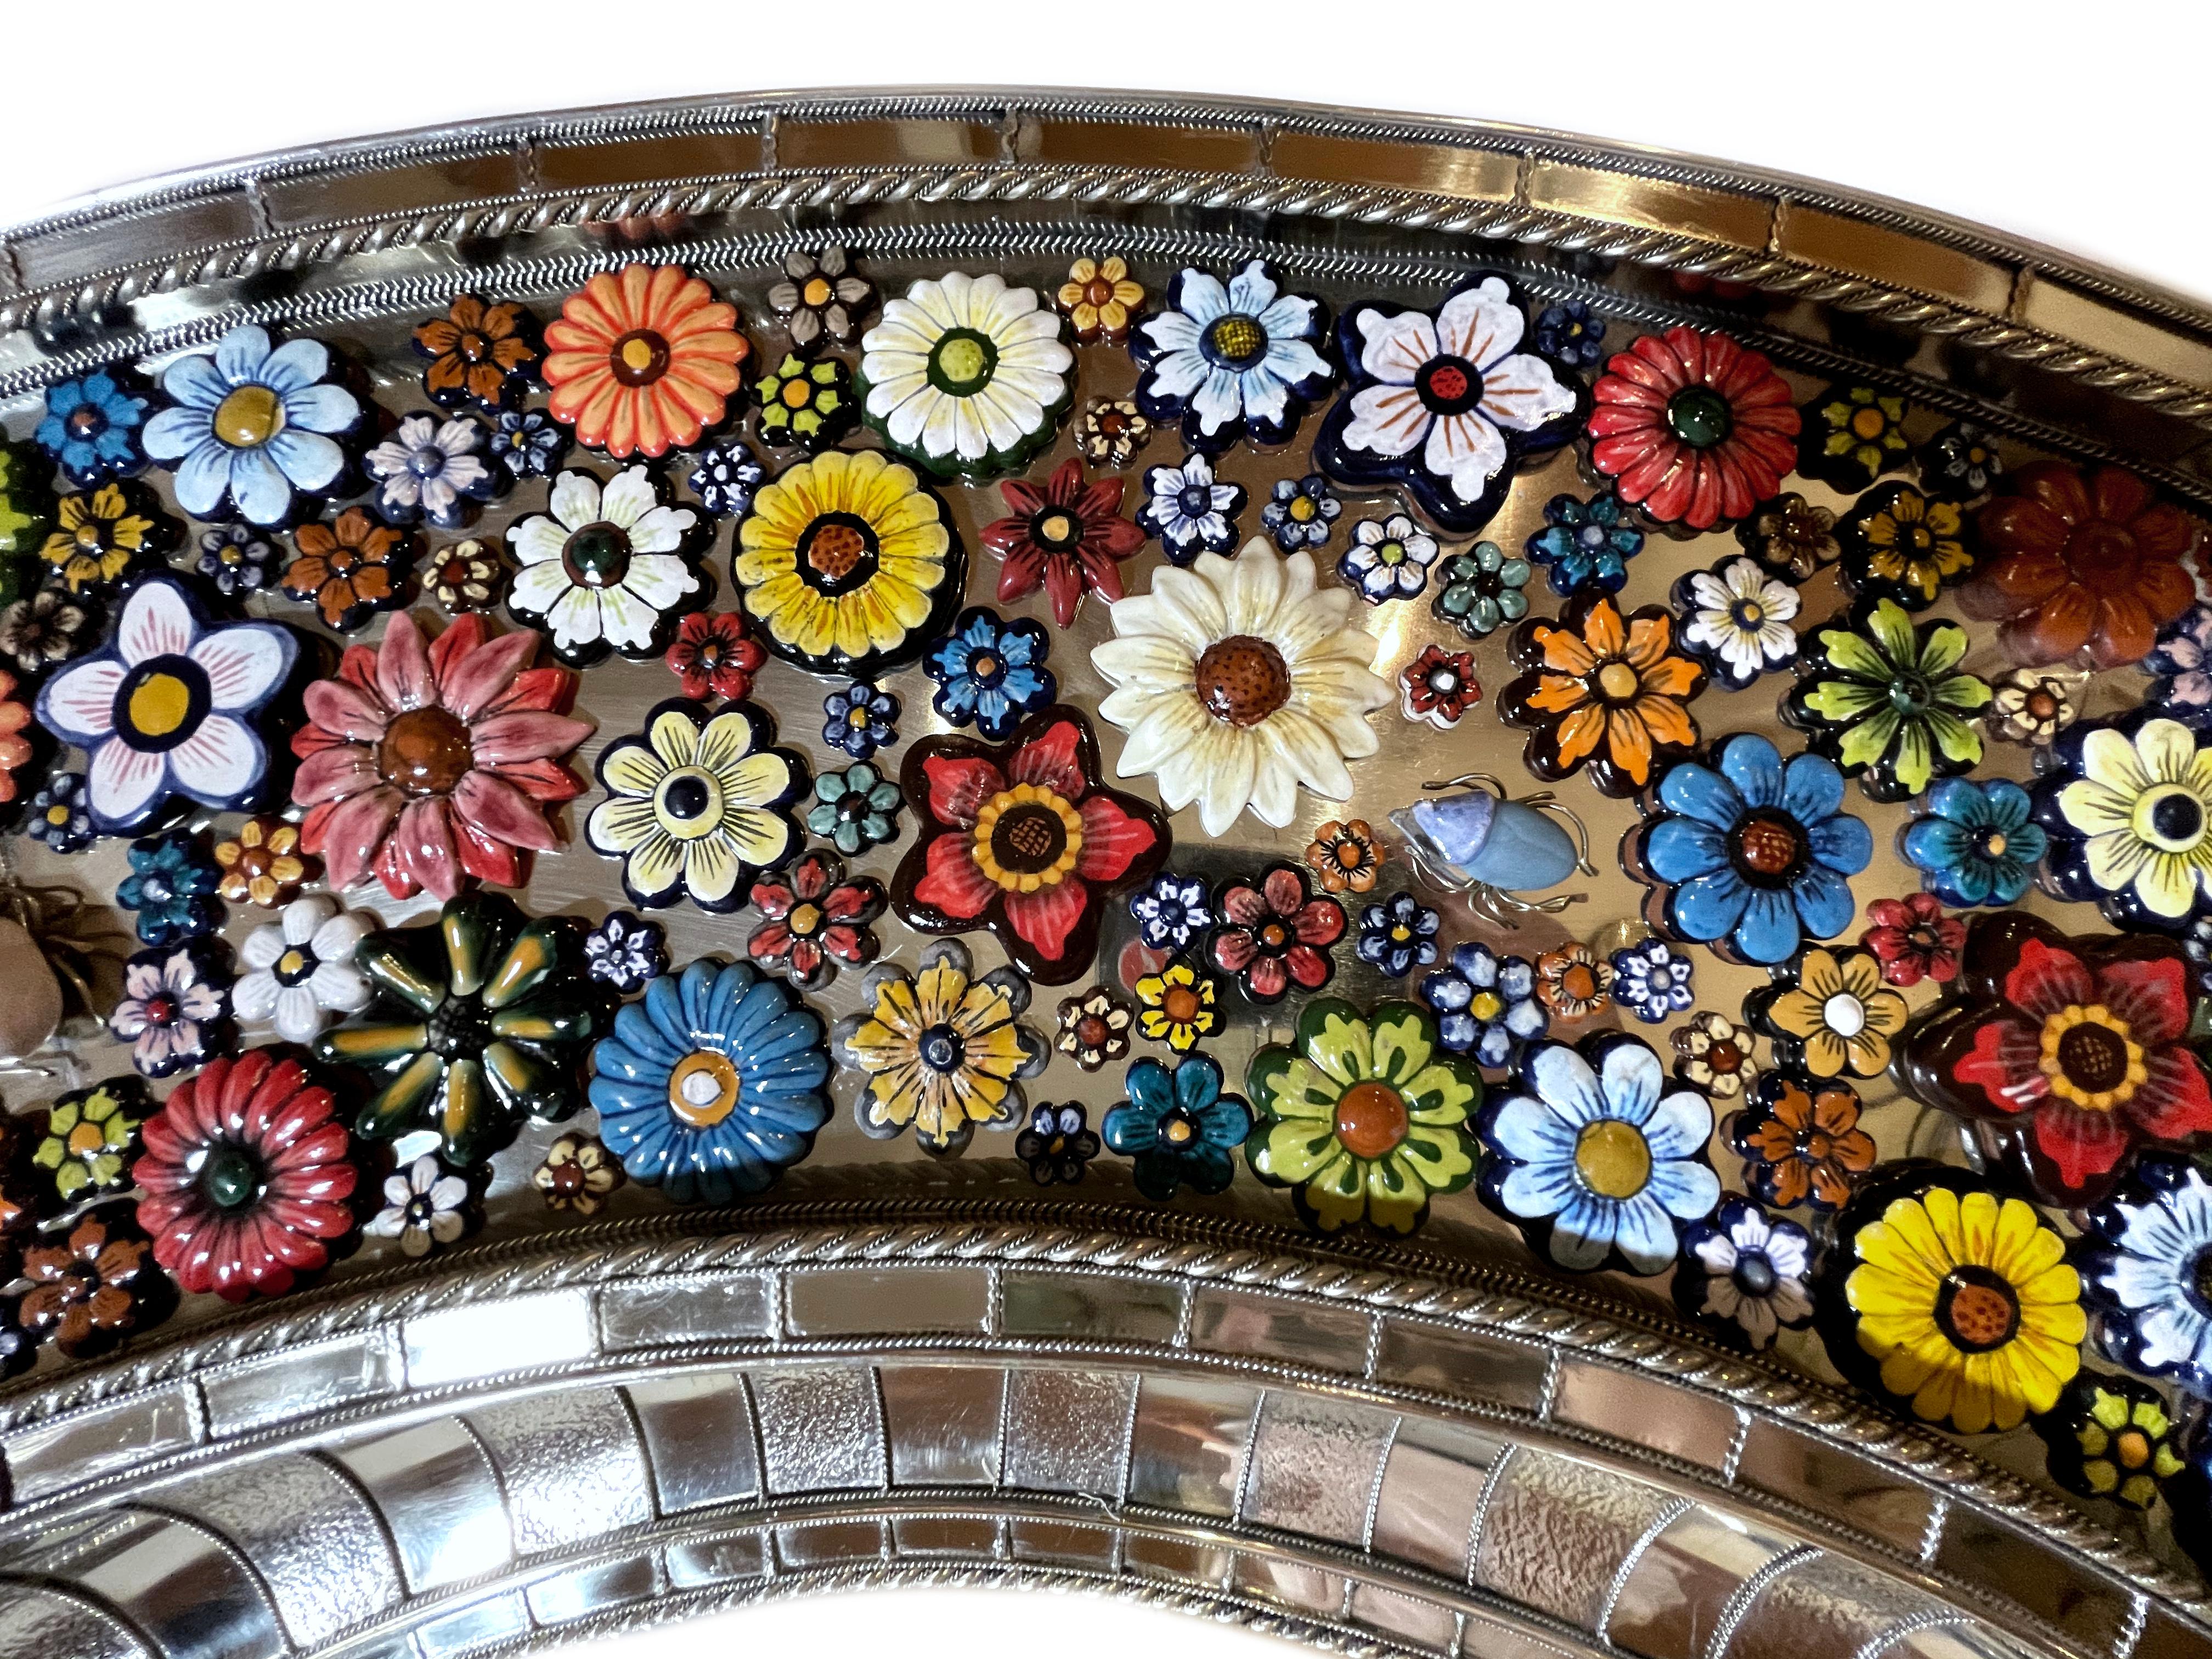 Mexican Roundy Convex Mirror,  Hand Painted Ceramic Flowers and Insects over White Metal